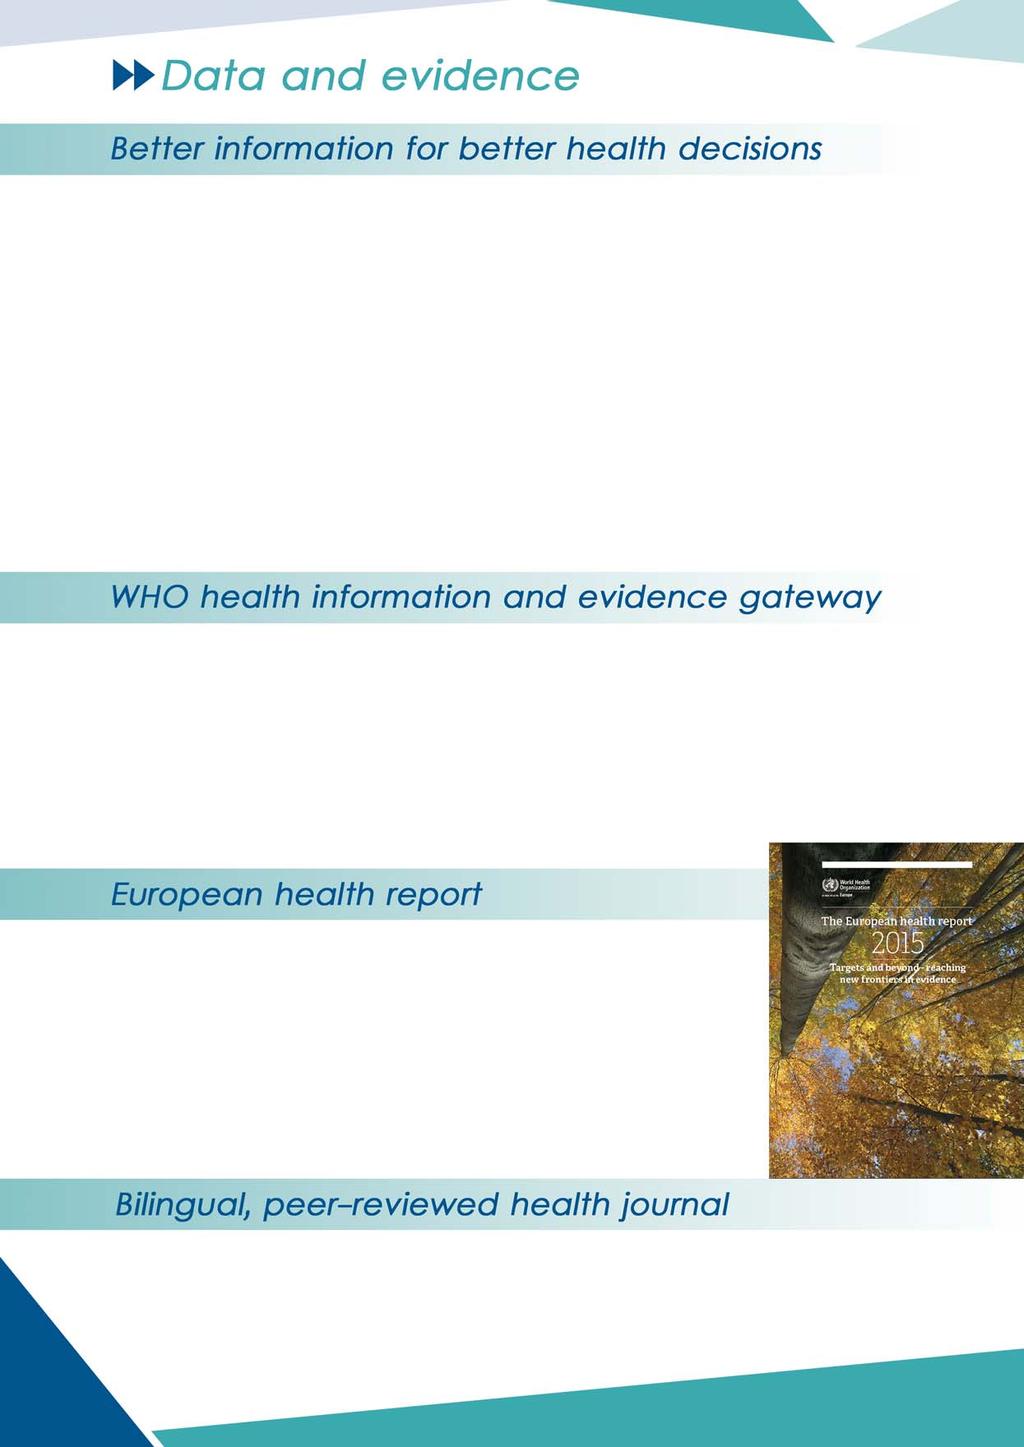 on public health. The European Health Information Initiative is a multi-partner network committed to improving health by providing the information that underpins policy.